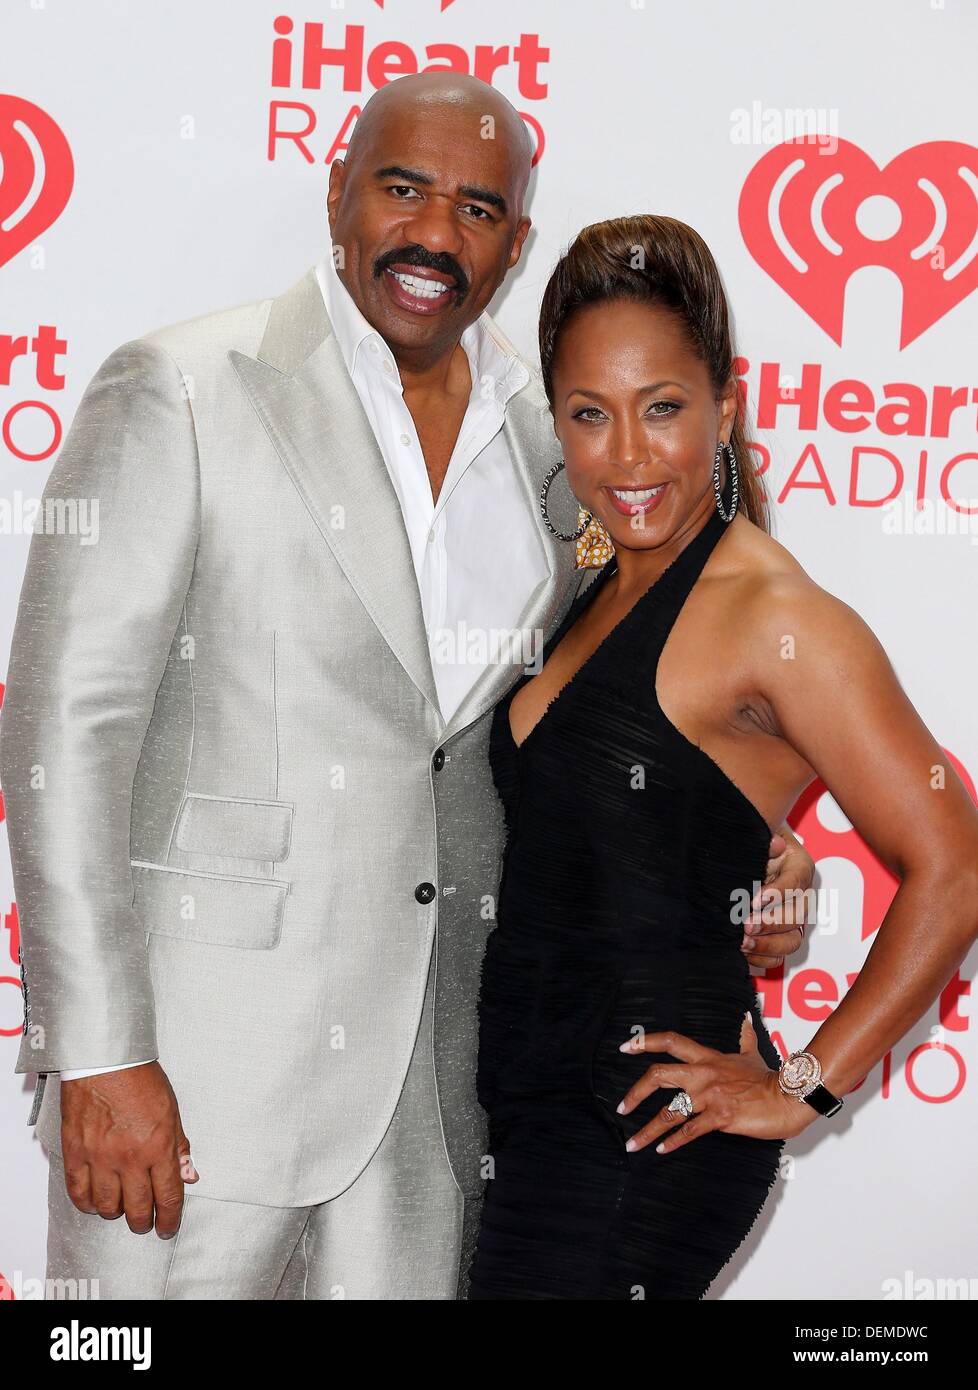 Marjorie And Steve Harvey Give Us Style Goals